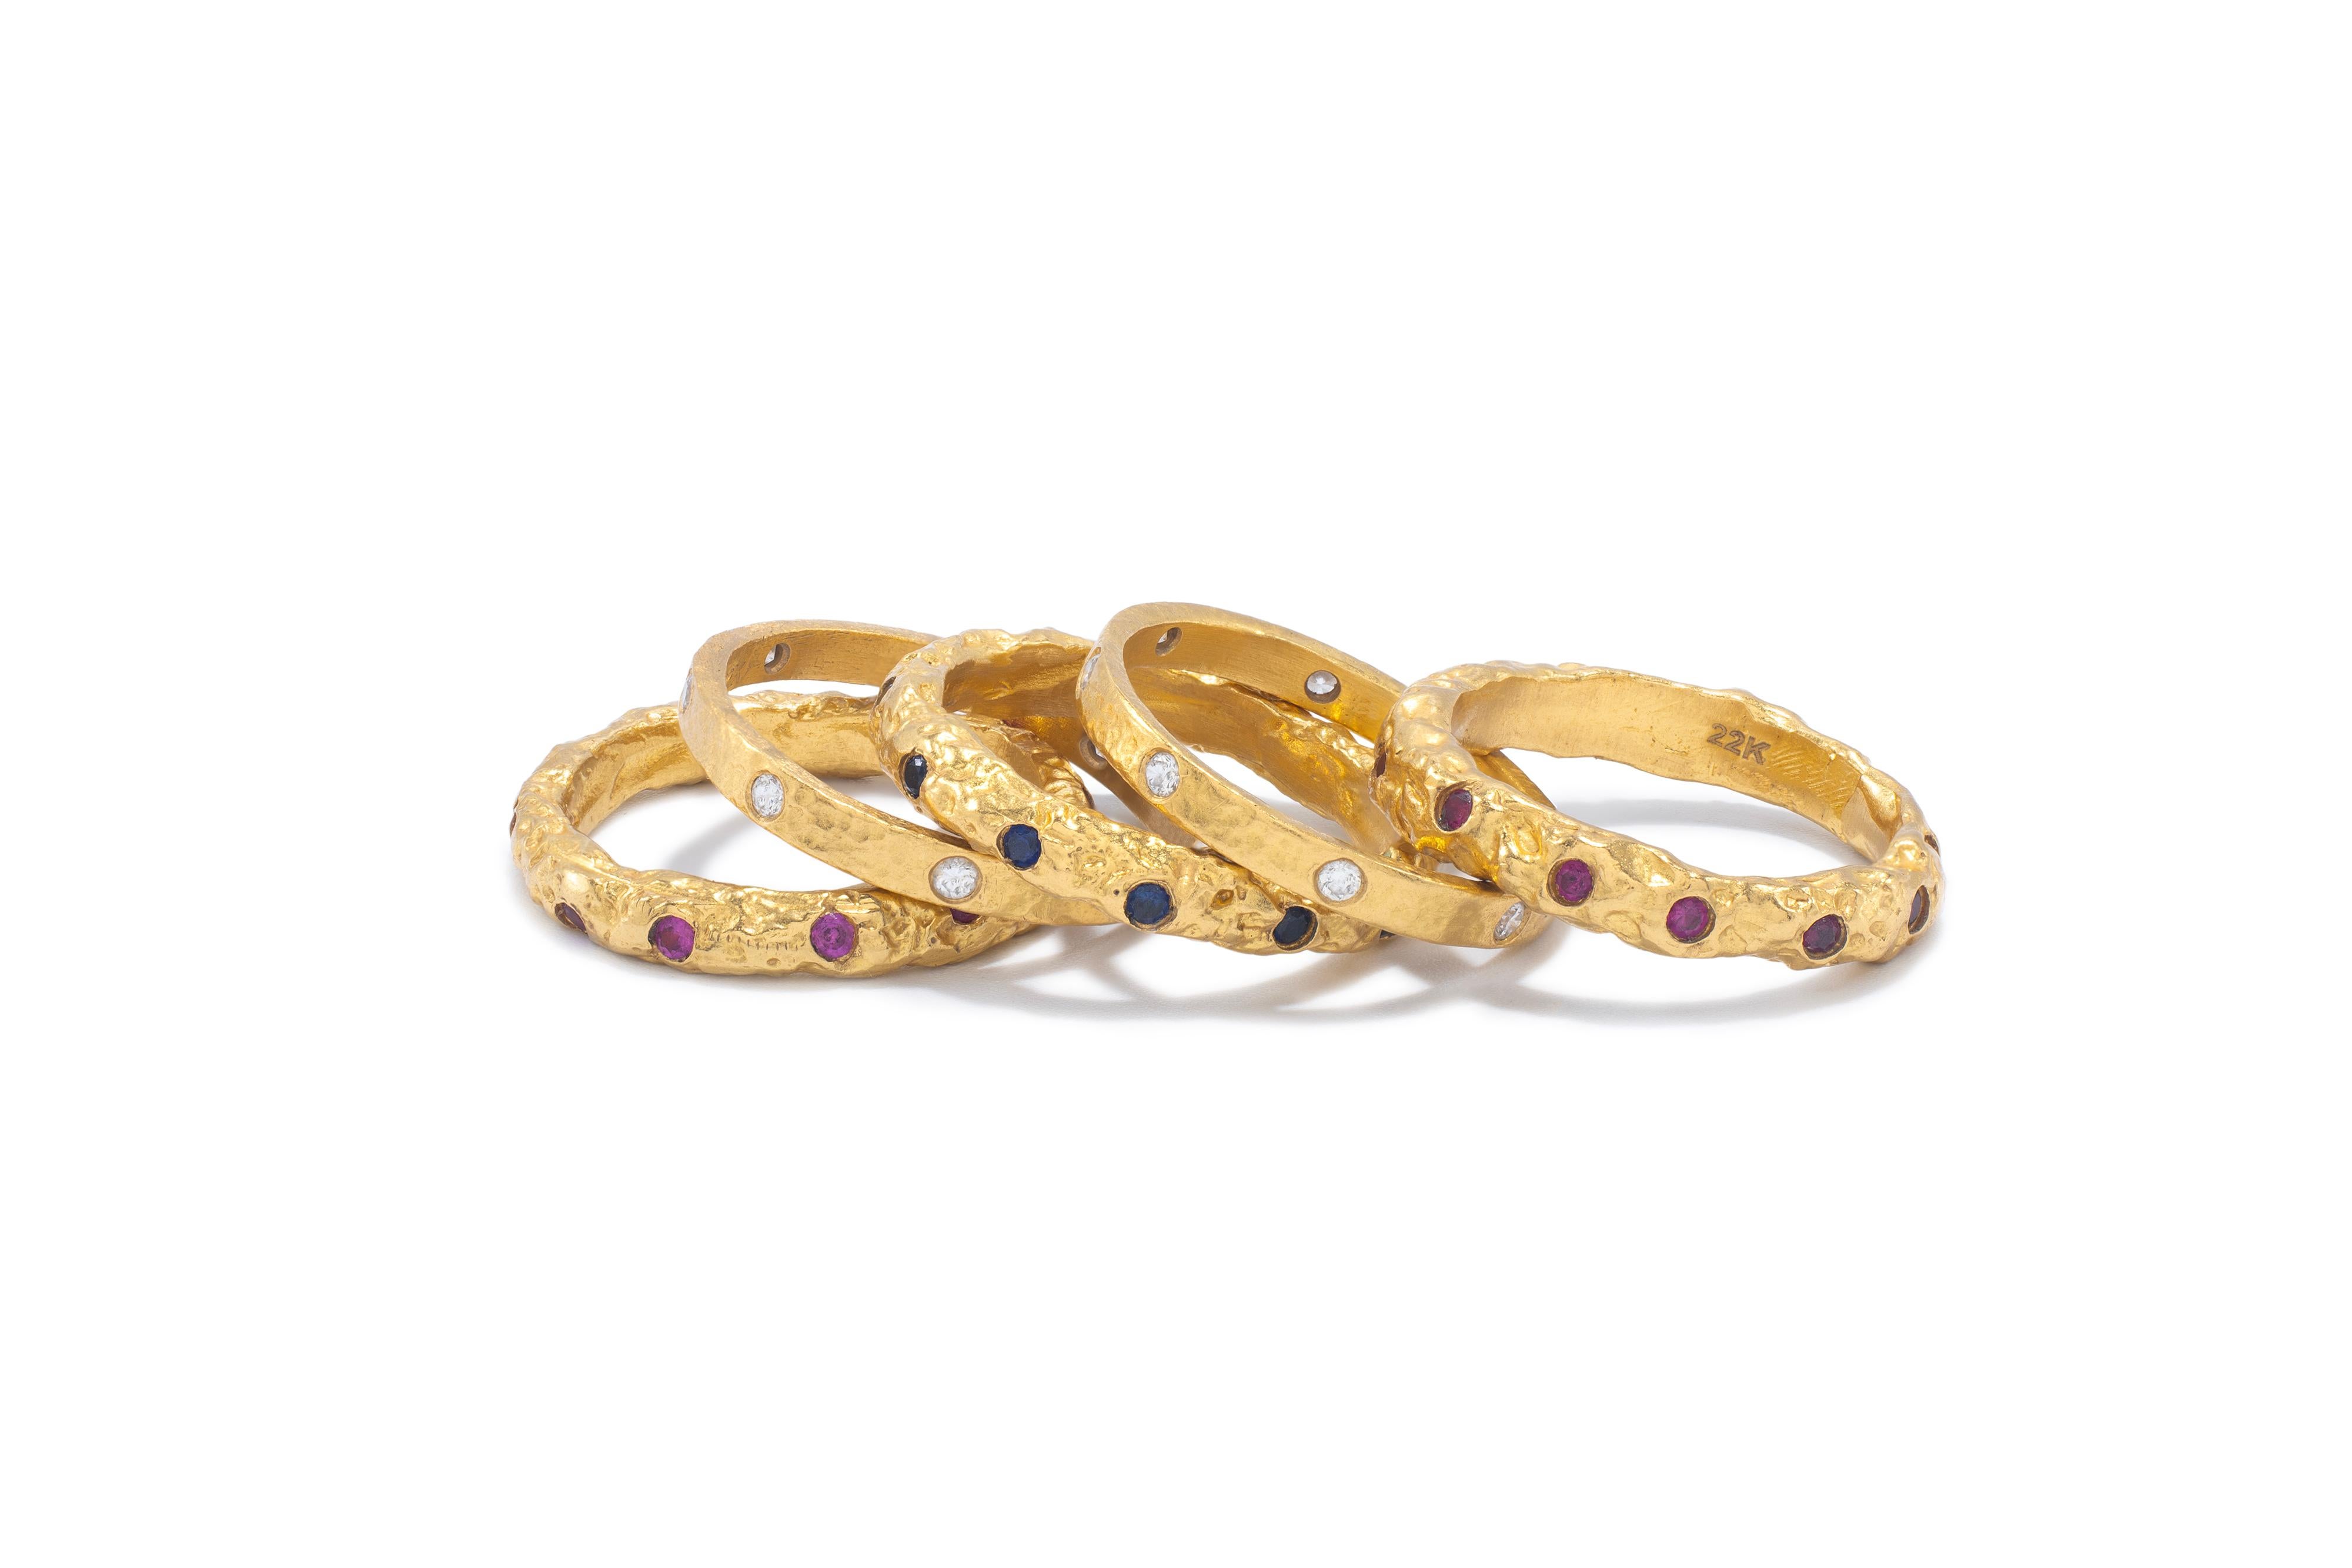 Brilliant Cut 22k Gold Chunky Foil Stacking Rings with Pink Sapphires, by Tagili For Sale